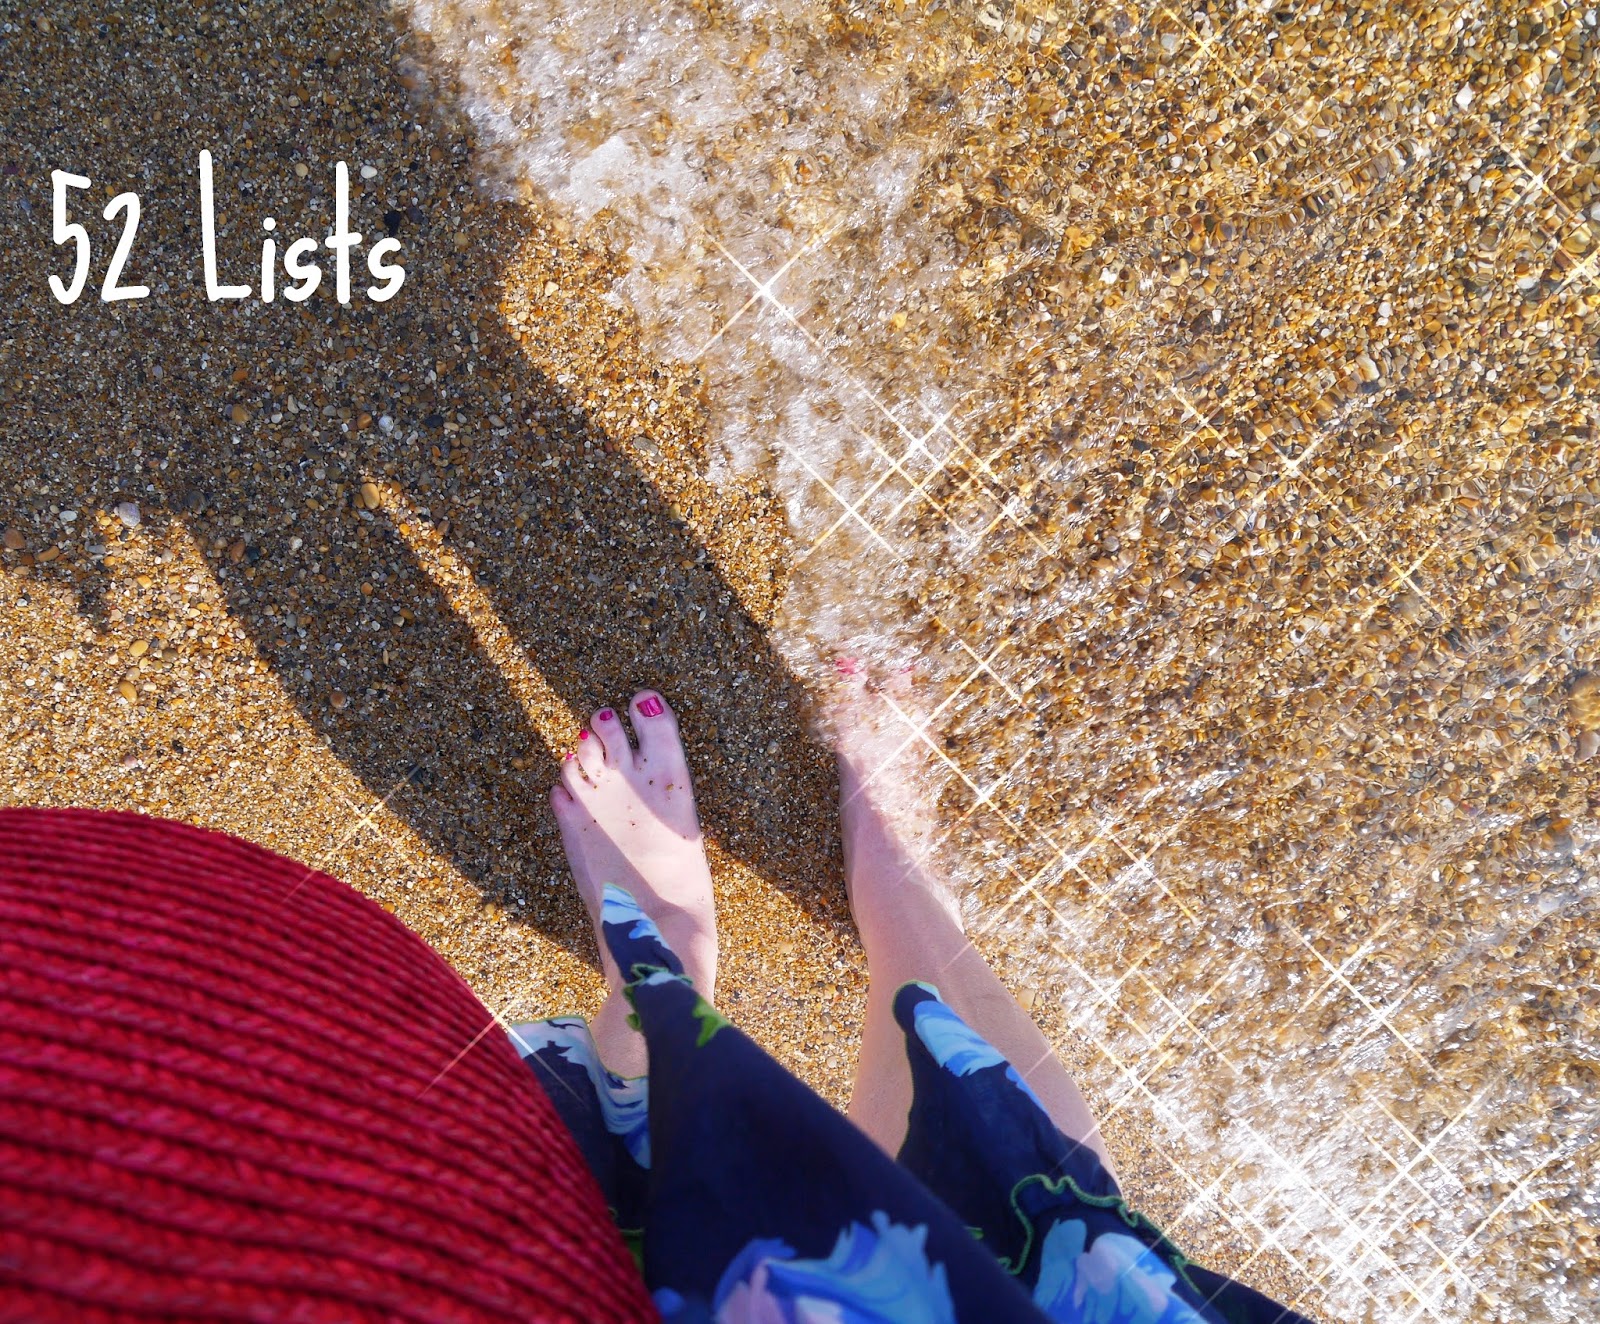 52 Lists - Your Summer To-Do List